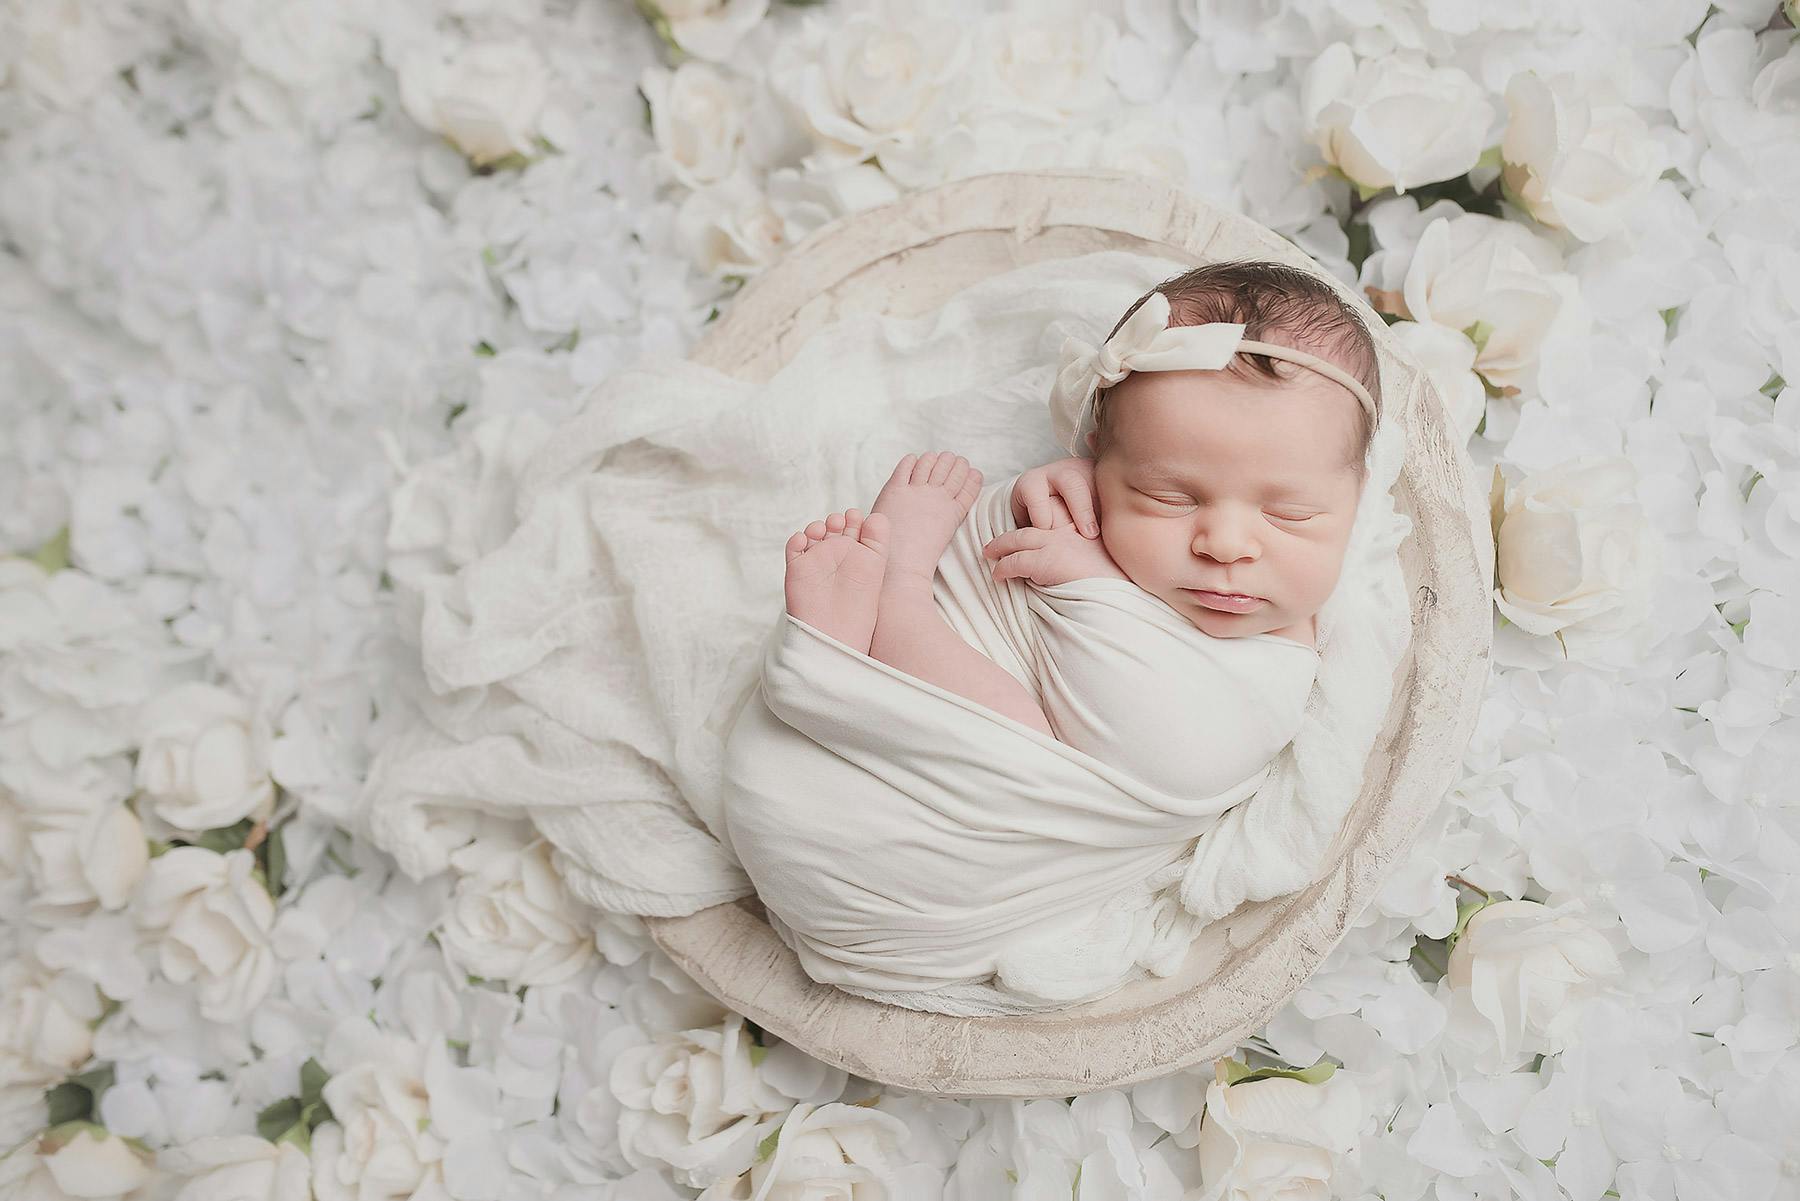 Surrounded by White - A Baby Girl Photo Shoot - Dallas Newborn